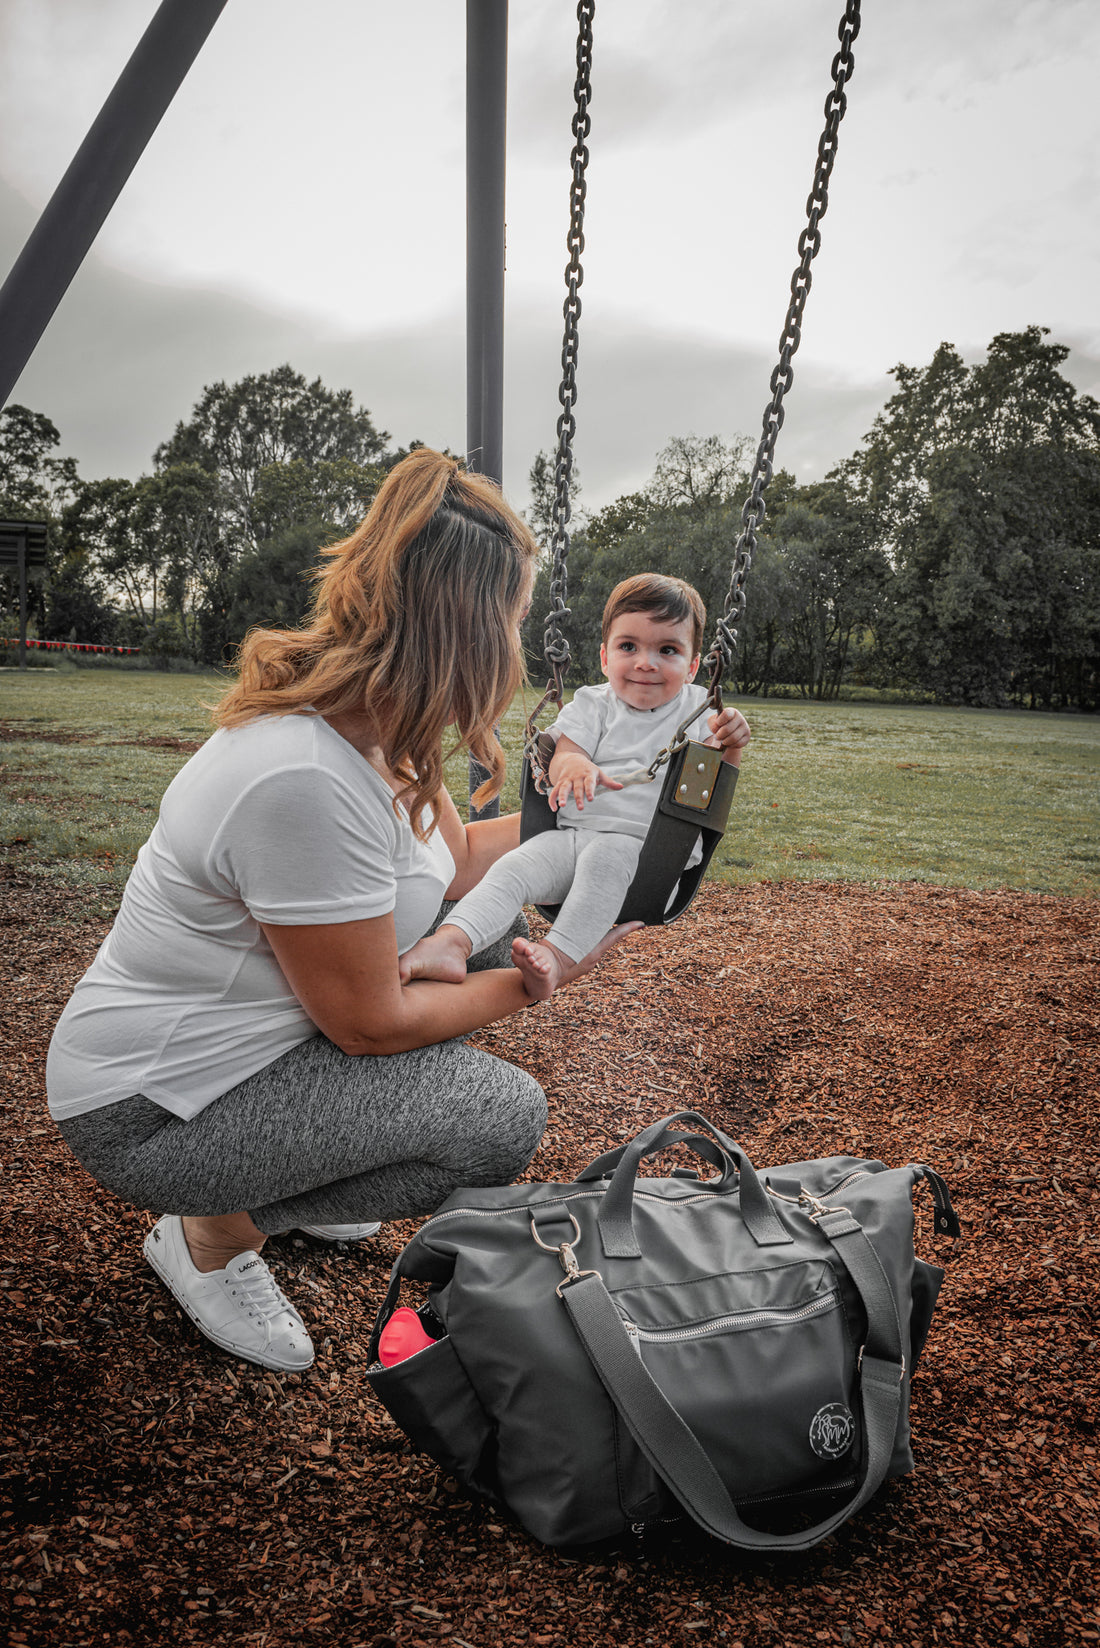 Mum kneeling in front of her baby boy who is sitting on the swing at a park playground. Beside them is The DUFFLE Nappy Bag in Chaos + Calm (charcoal).